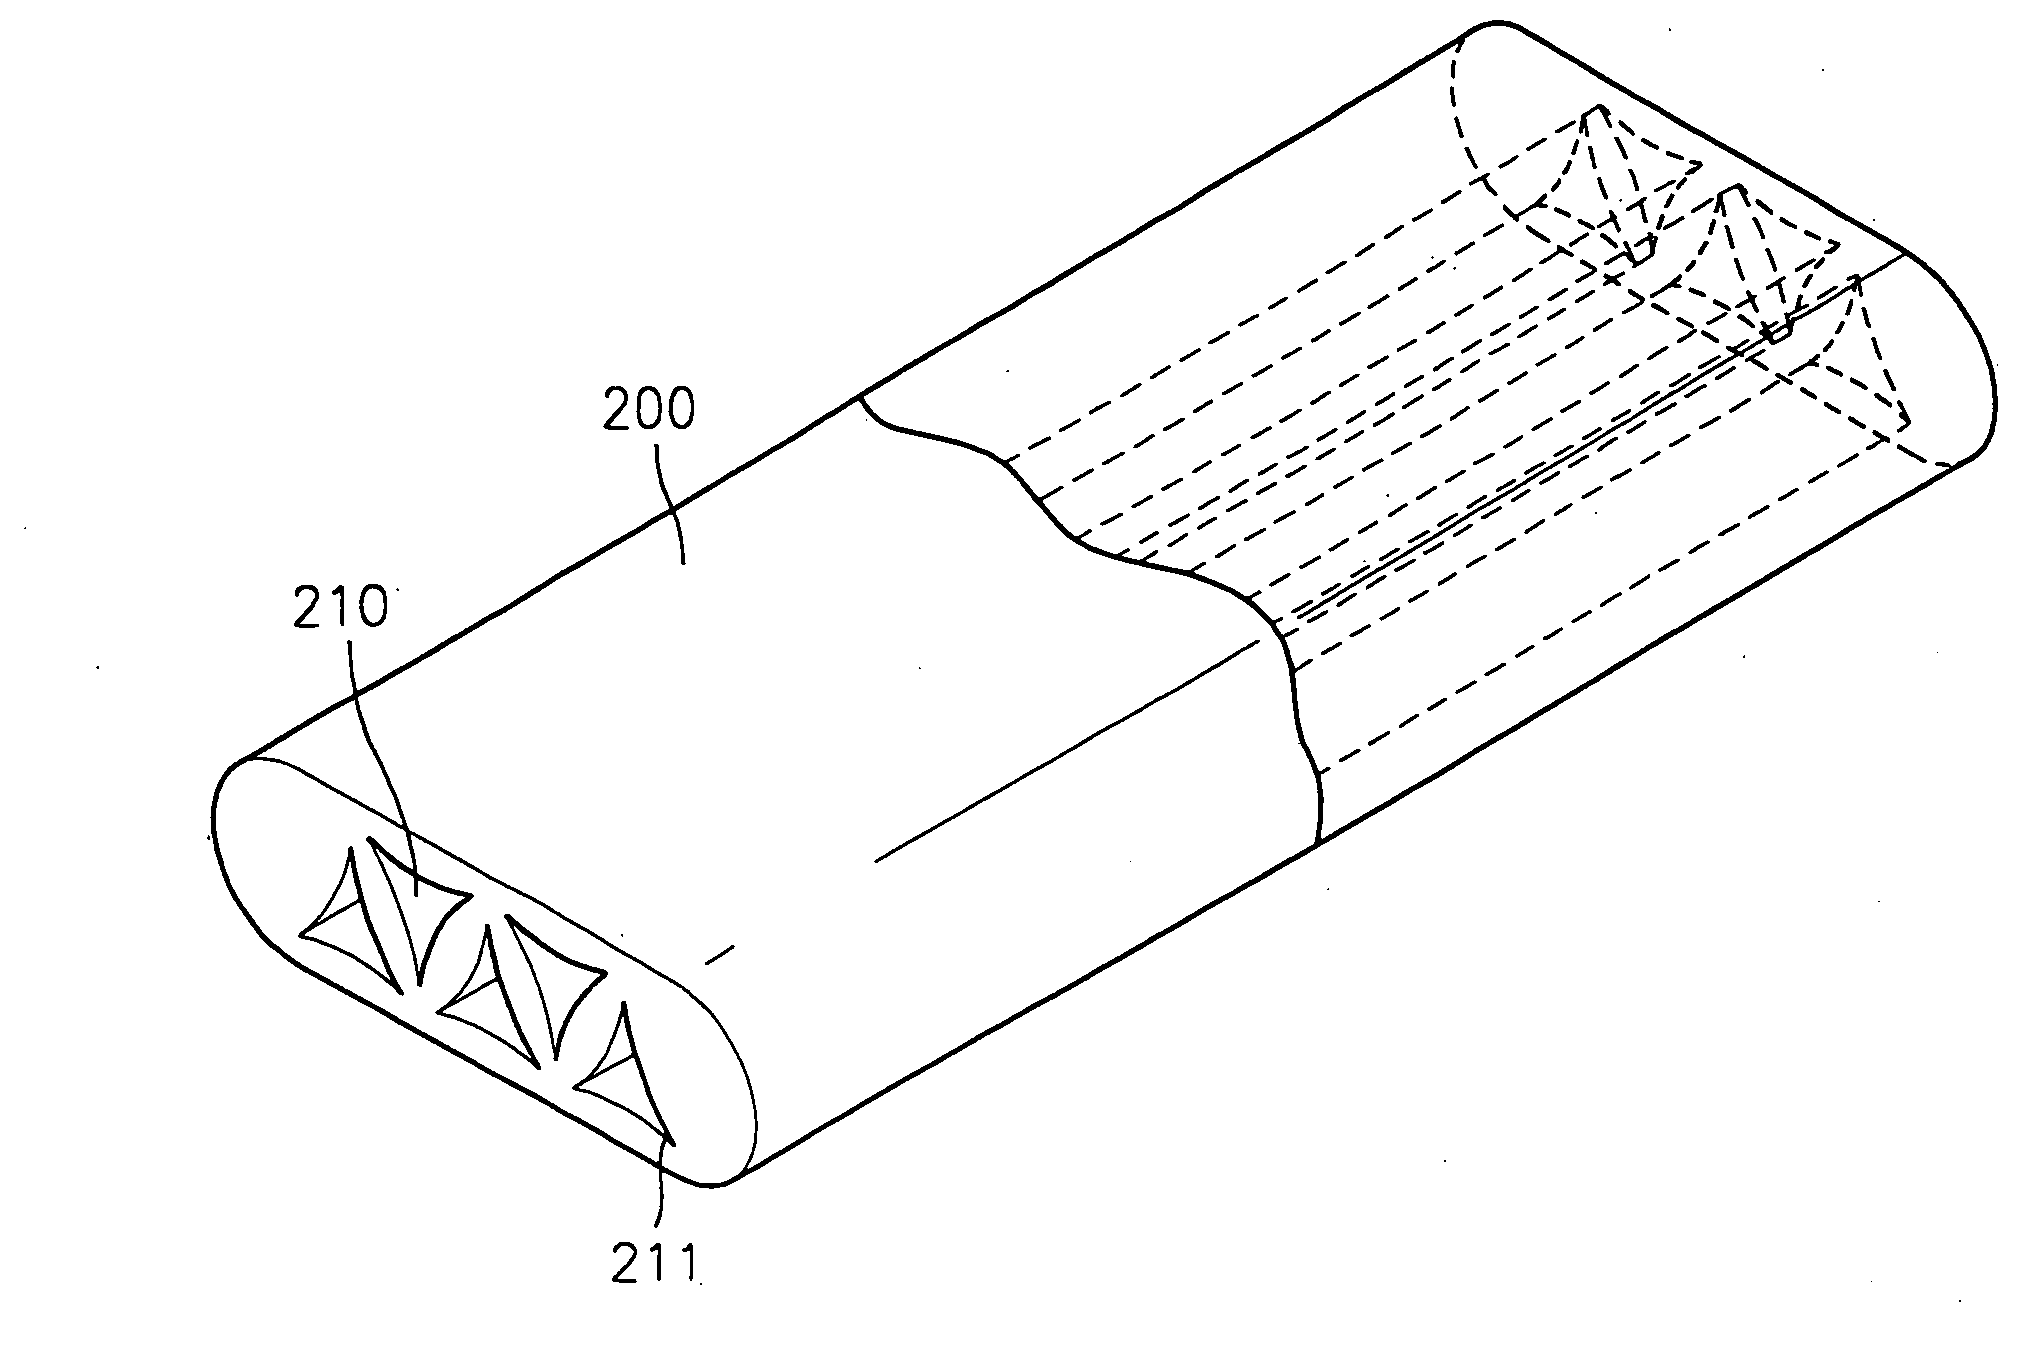 Micro heat pipe with pligonal cross-section manufactured via extrusion or drawing